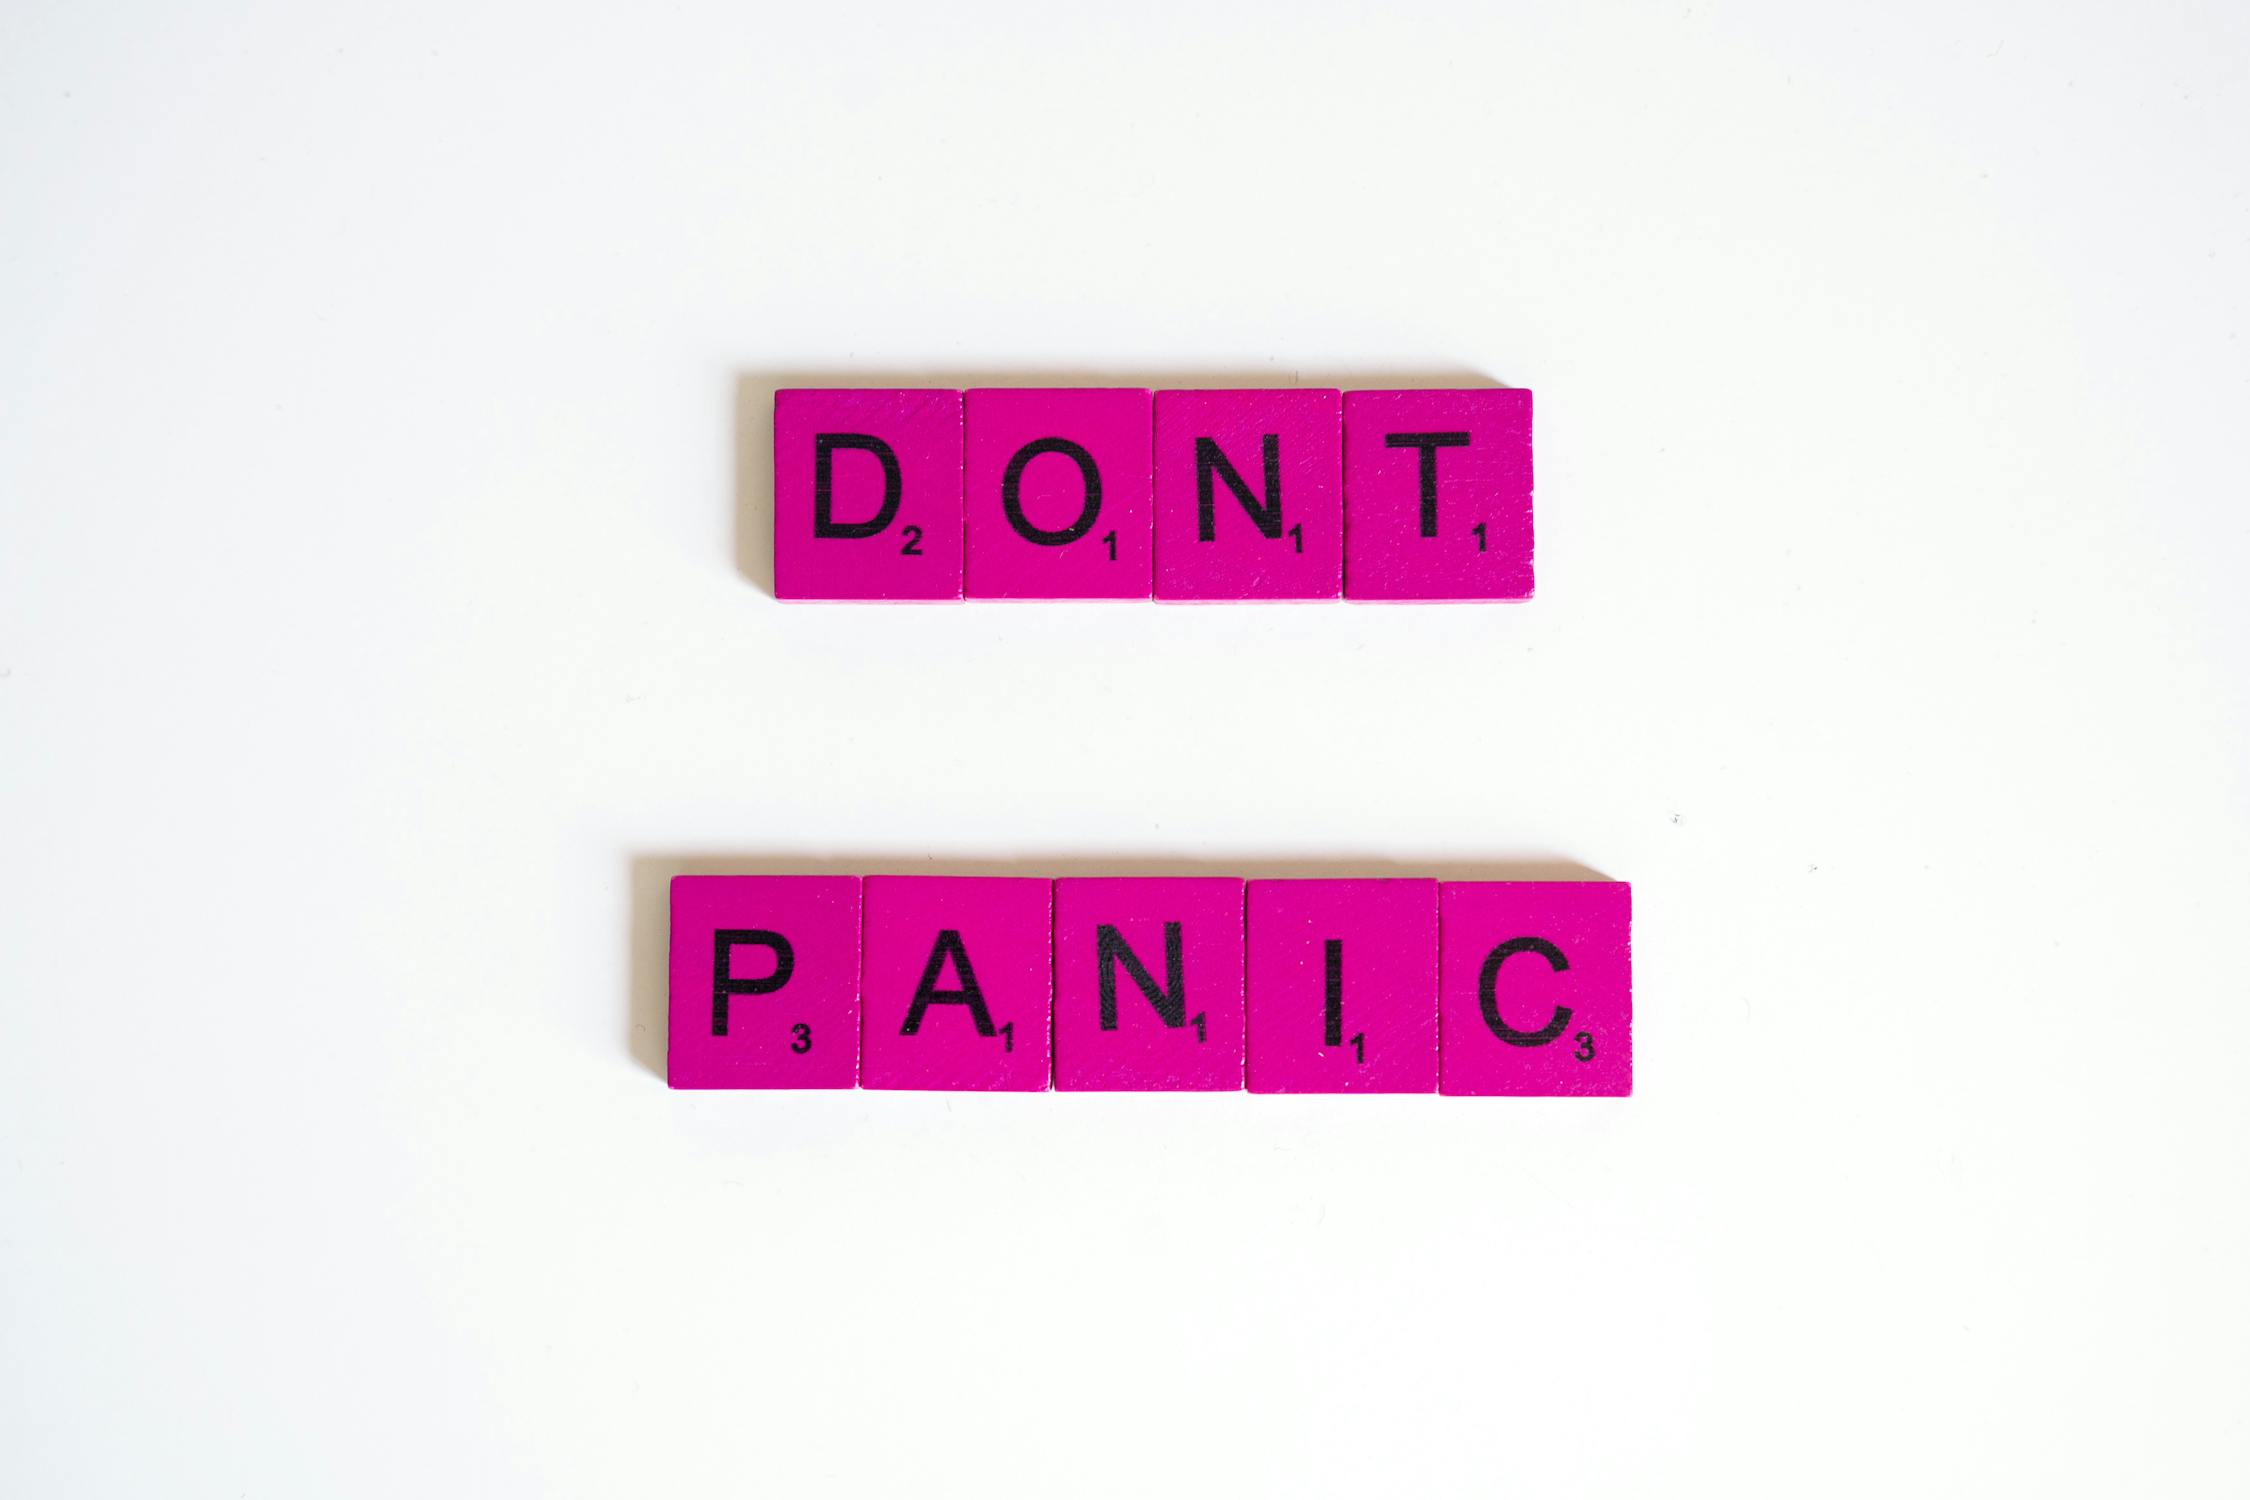 pink scrabble tiles spelling out the phrase 'Don't panic'